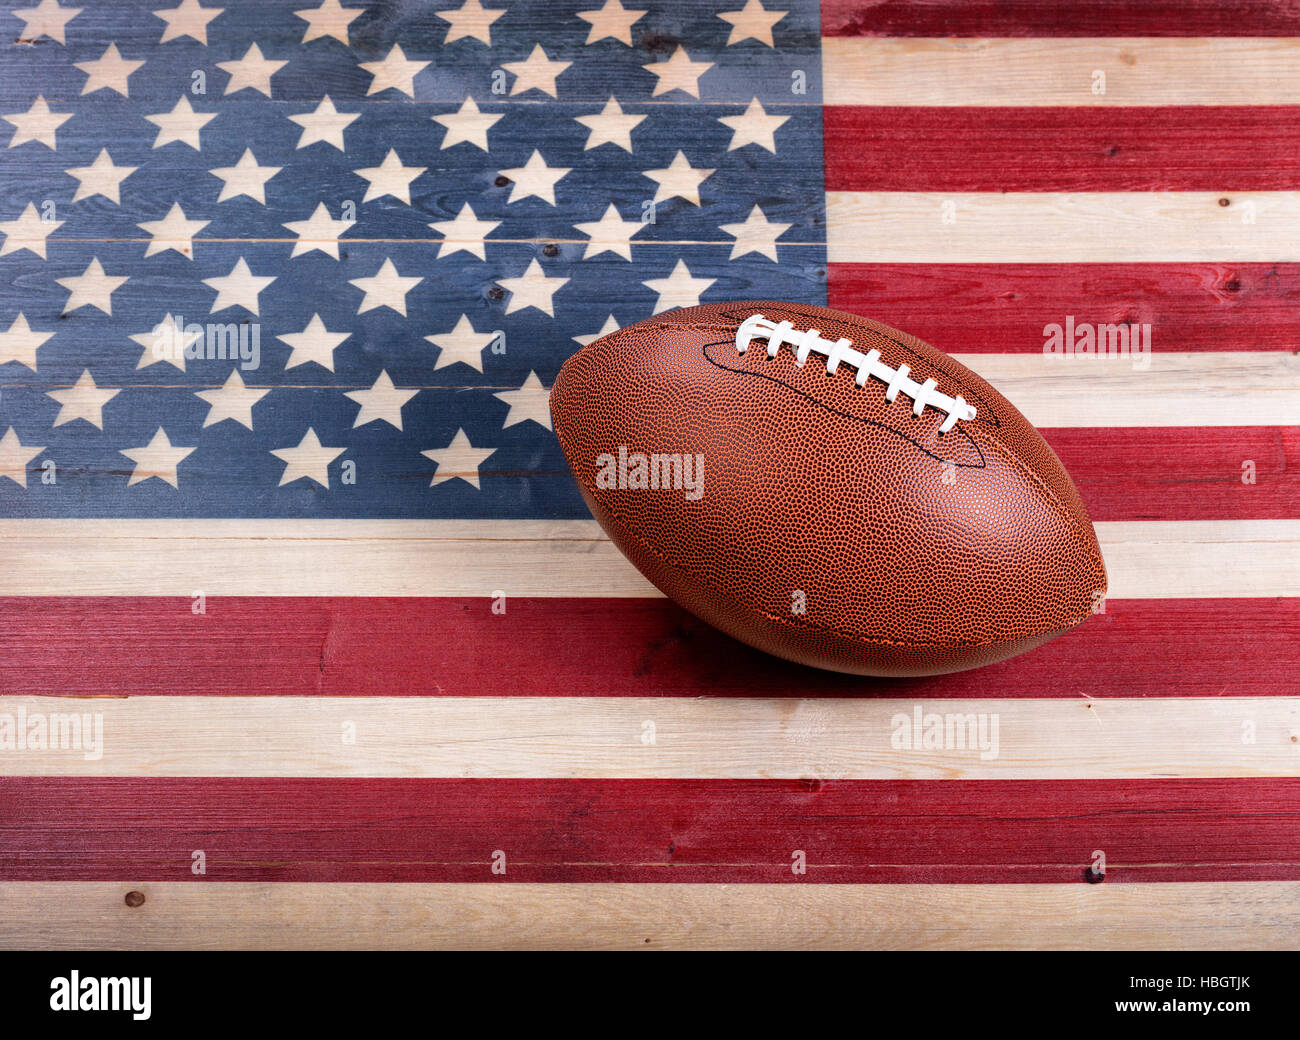 American football on rustic wooden USA flag Stock Photo